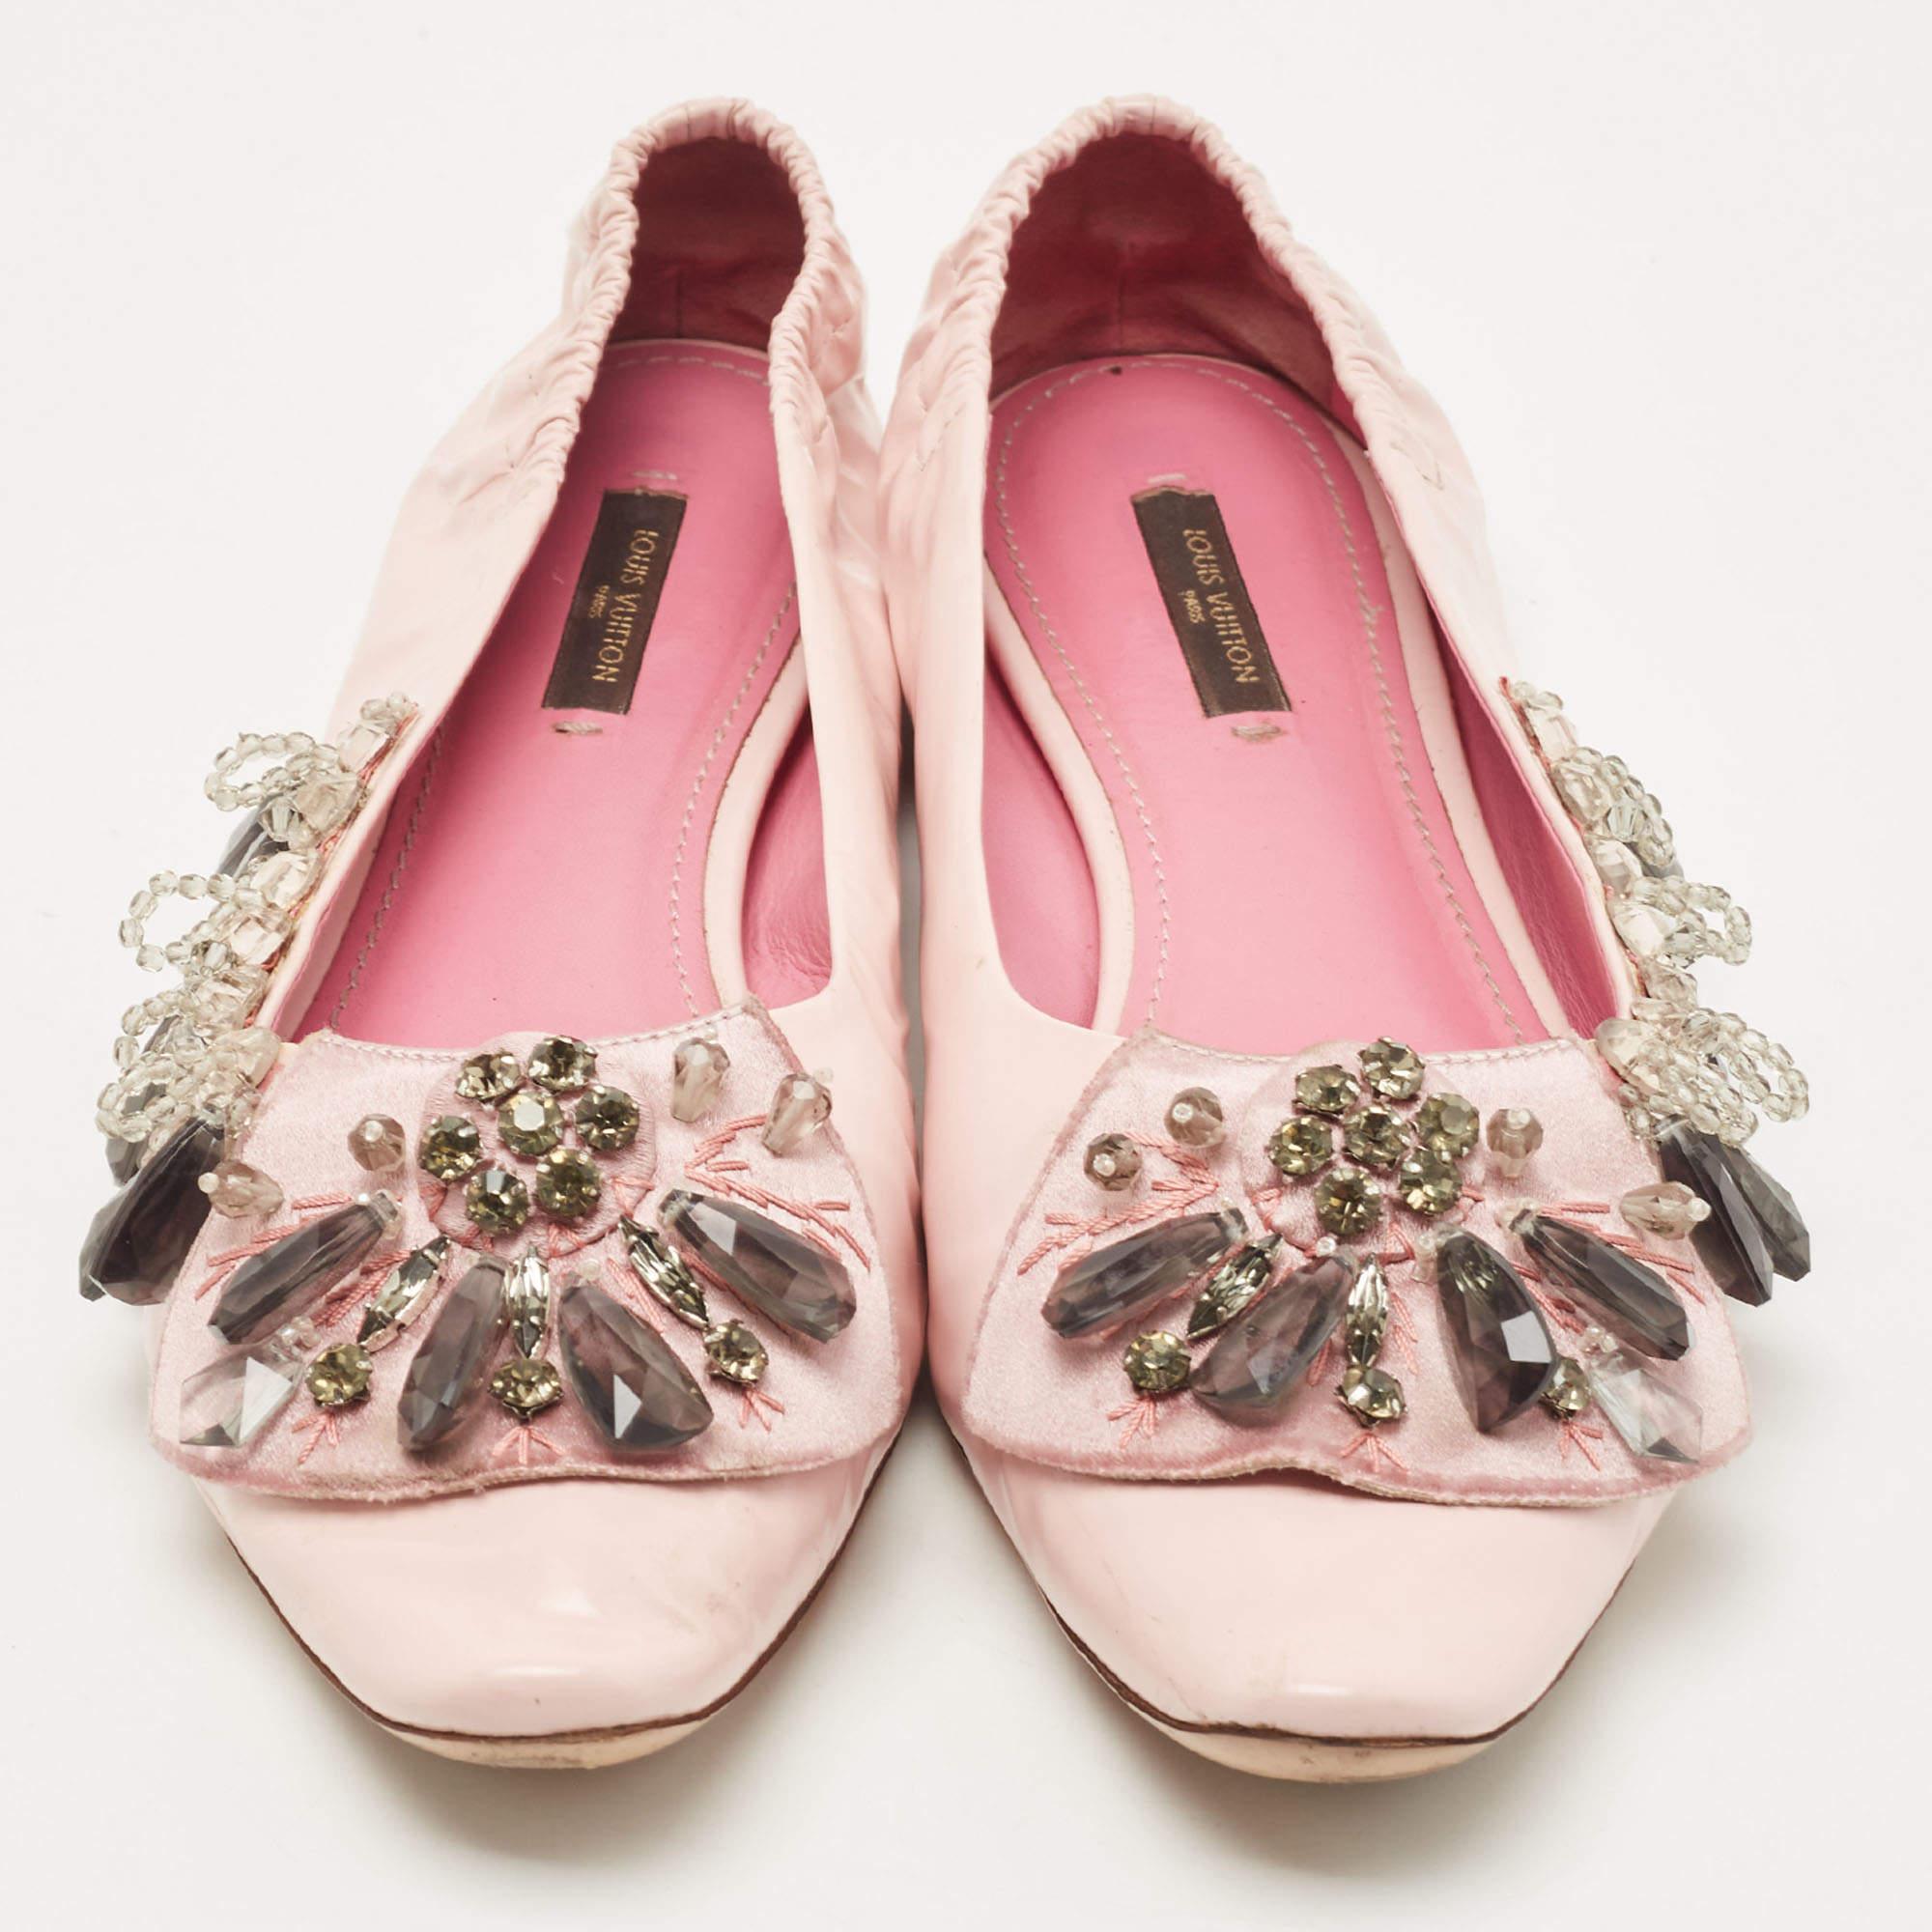 Practical, fashionable, and durable—these Louis Vuitton ballet flats are carefully built to be fine companions to your everyday style. They come made using the best materials to be a prized buy.

